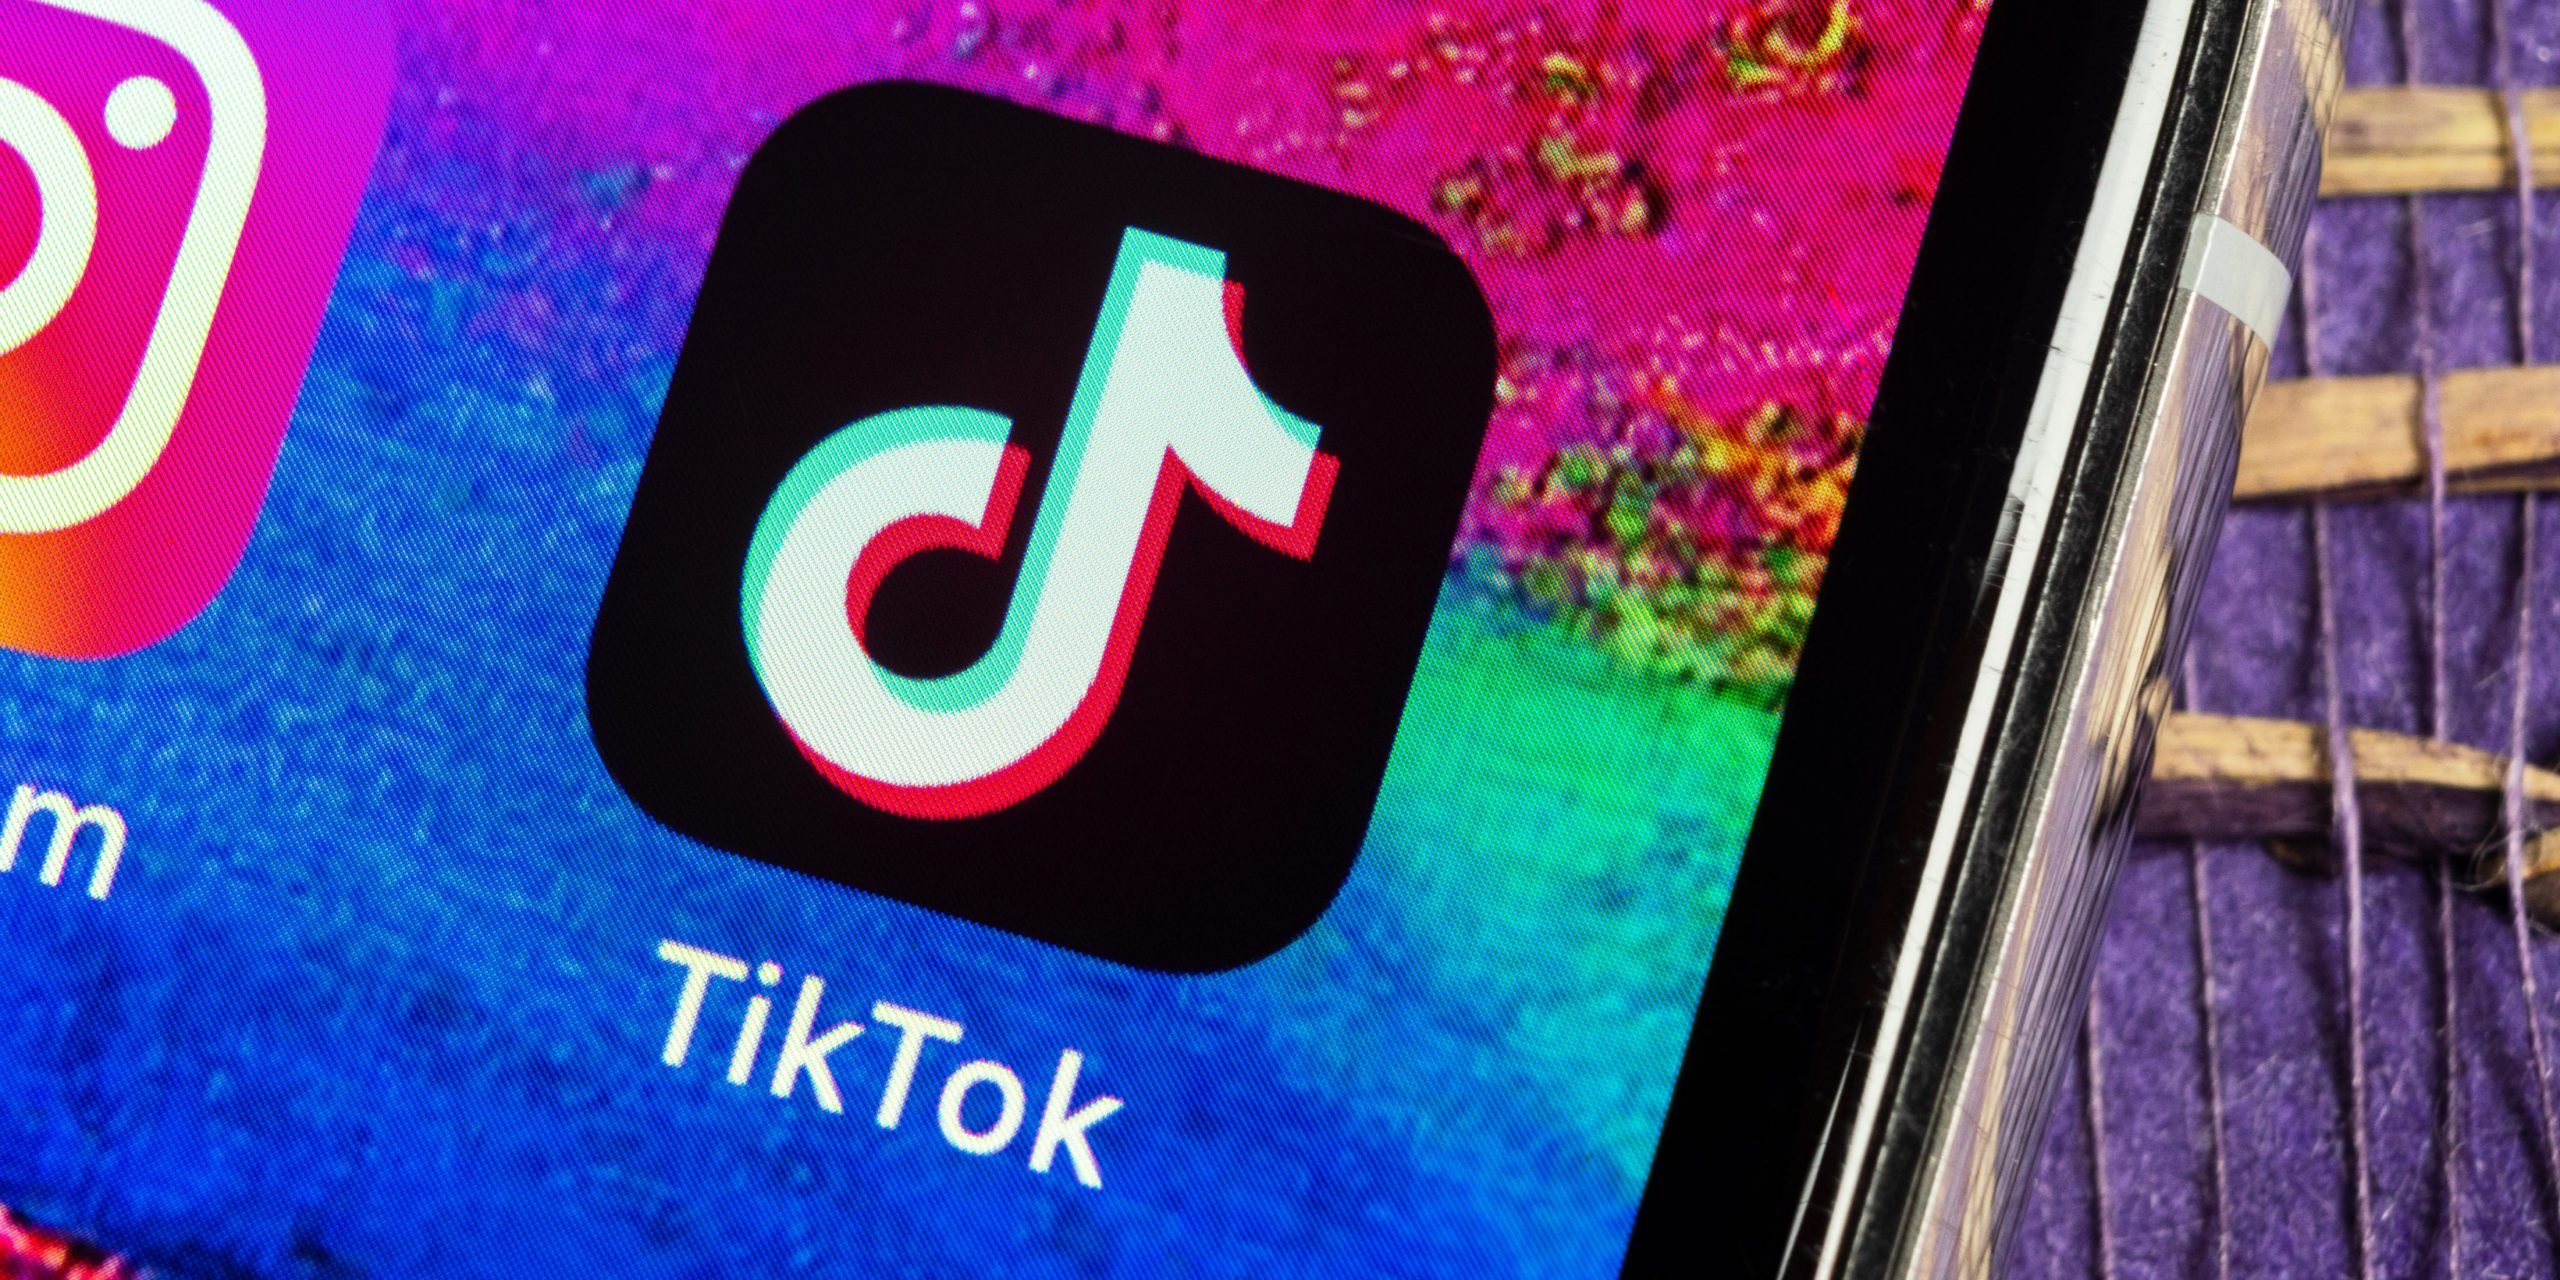 The TikTok app logo on an iPhone with a colorful background.